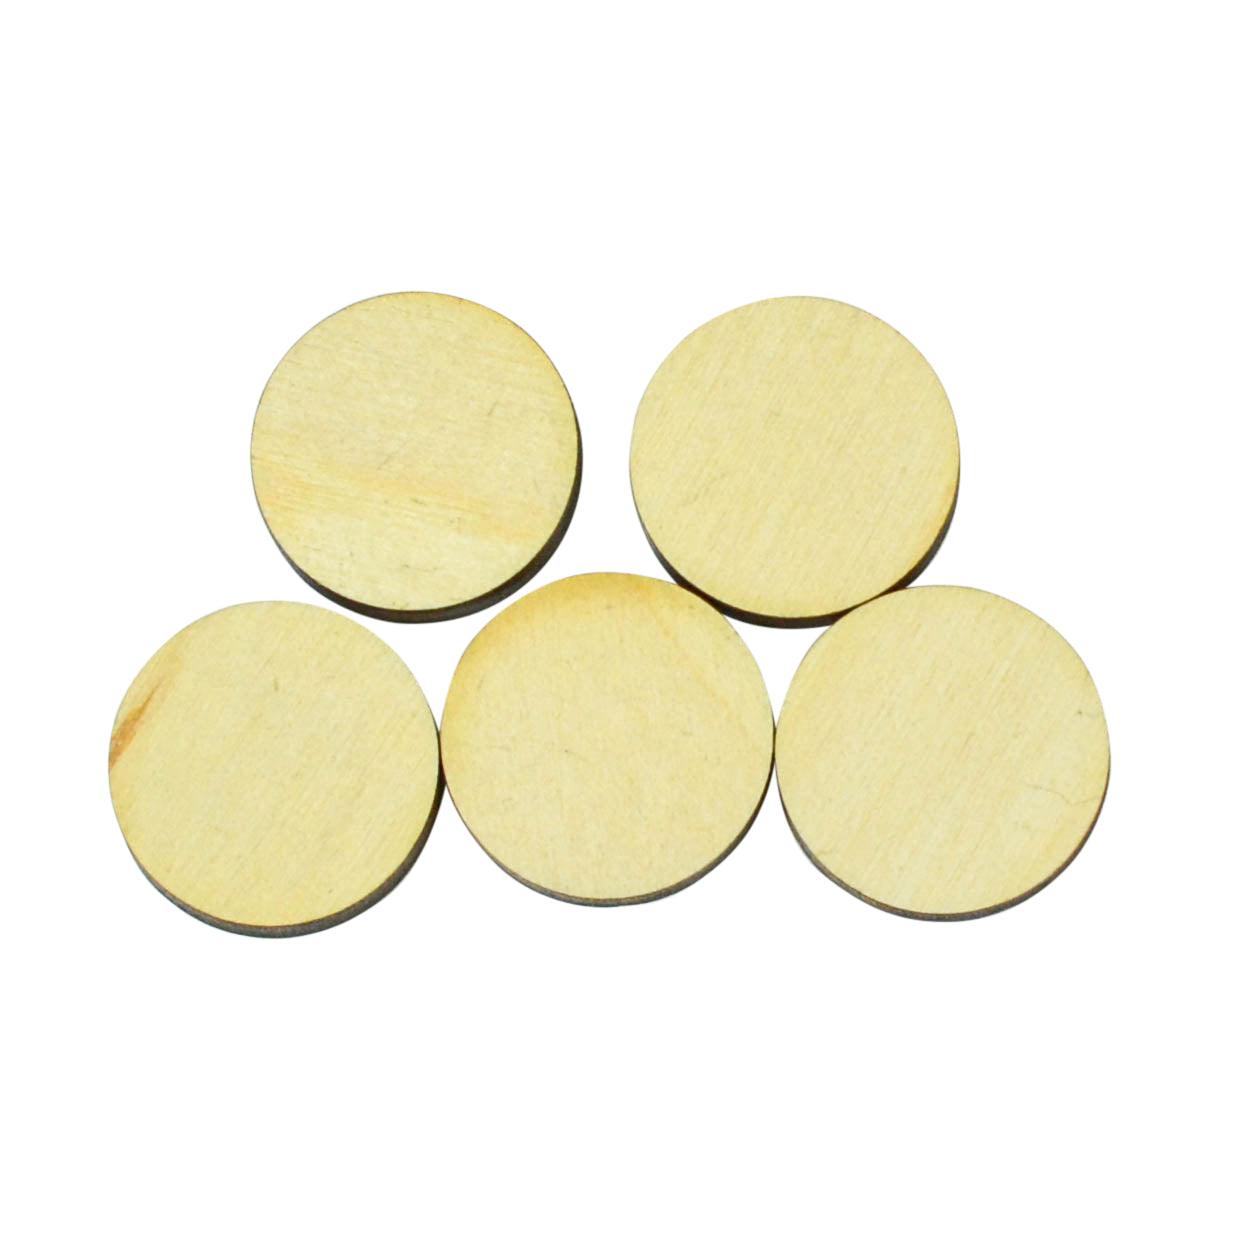 1/4" Thick - Large Birch Blank Rounds - Various Sizes - 16" to 20" - Wall Decor - Door Hangers - Centerpiece - Glowforge - Knot Creatives